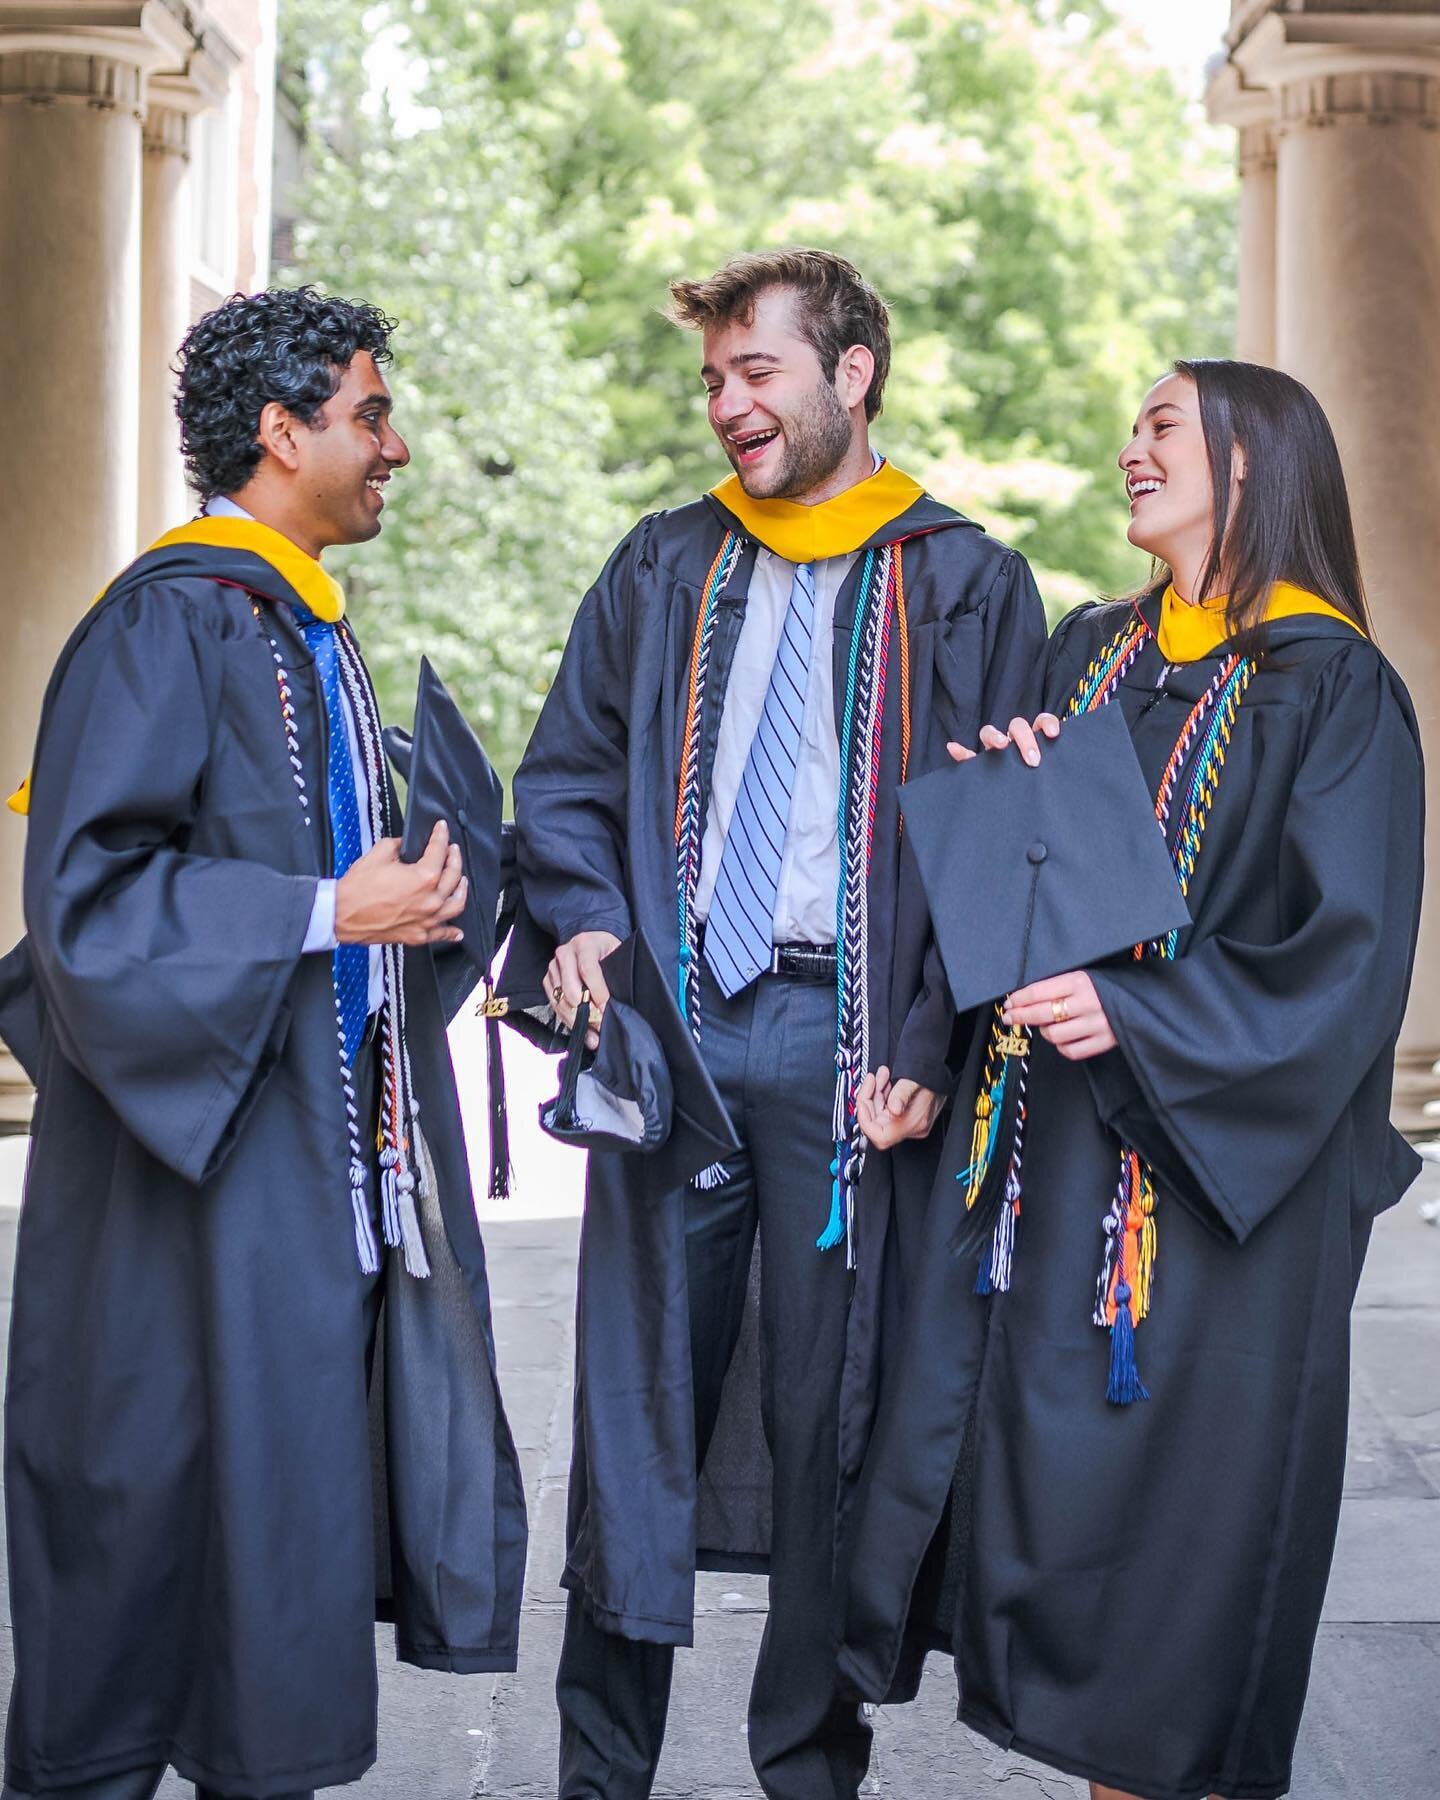 Jack, Mia, and Vikram, congratulations on graduation! While this is a bittersweet moment for us, we are so excited for you and forever grateful for the lasting impact that you three have made on Counterparts and the Penn community as a whole! We are 